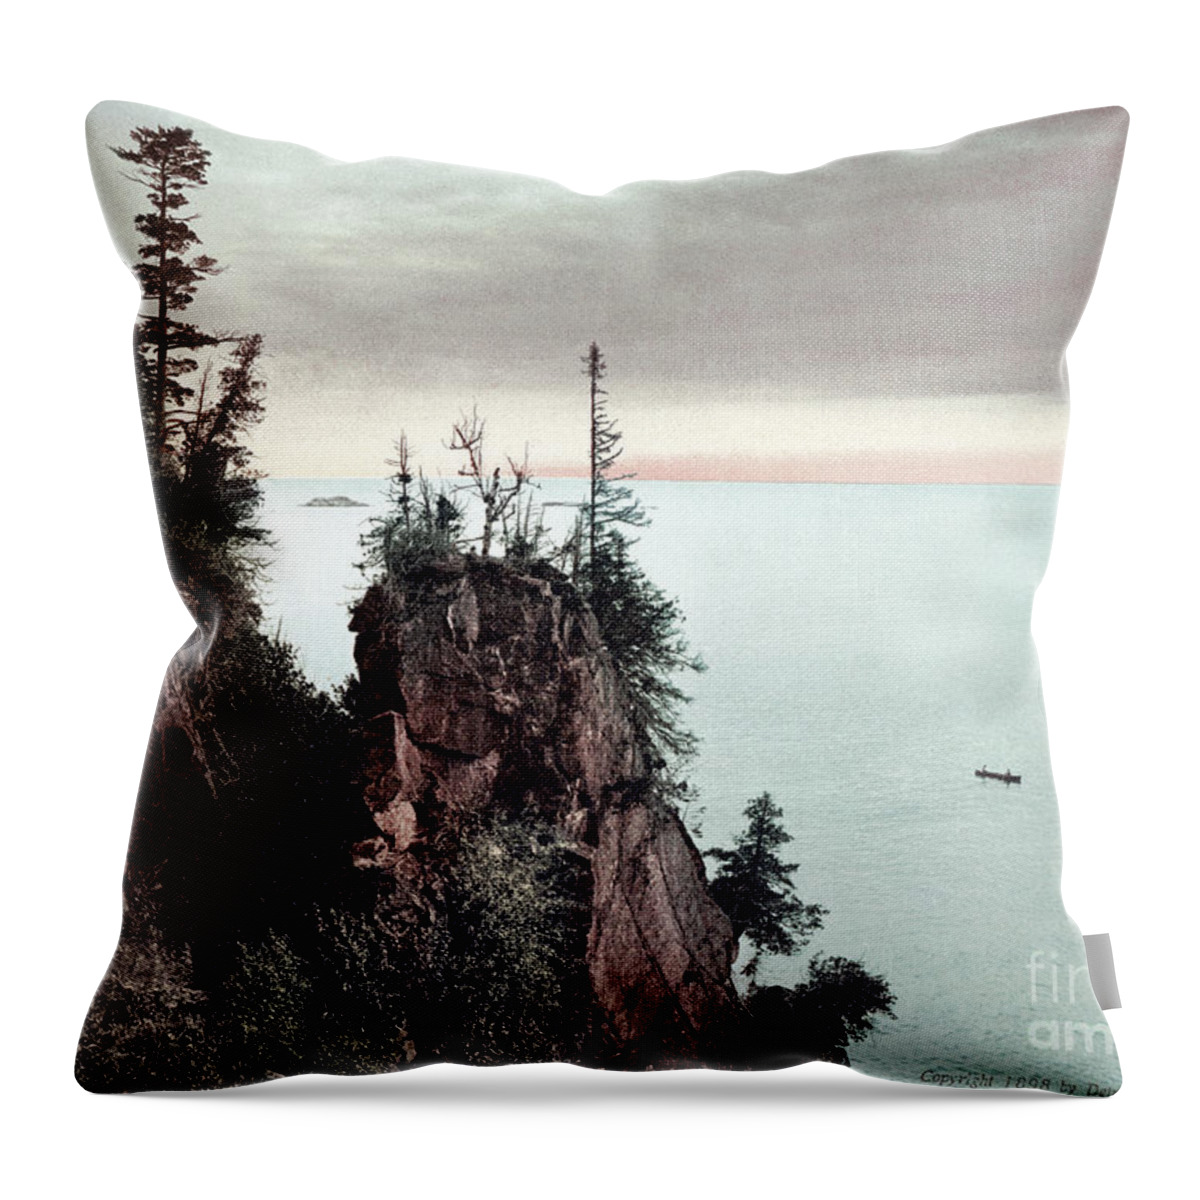 1898 Throw Pillow featuring the photograph Michigan, Presque Isle, 1898. by Granger